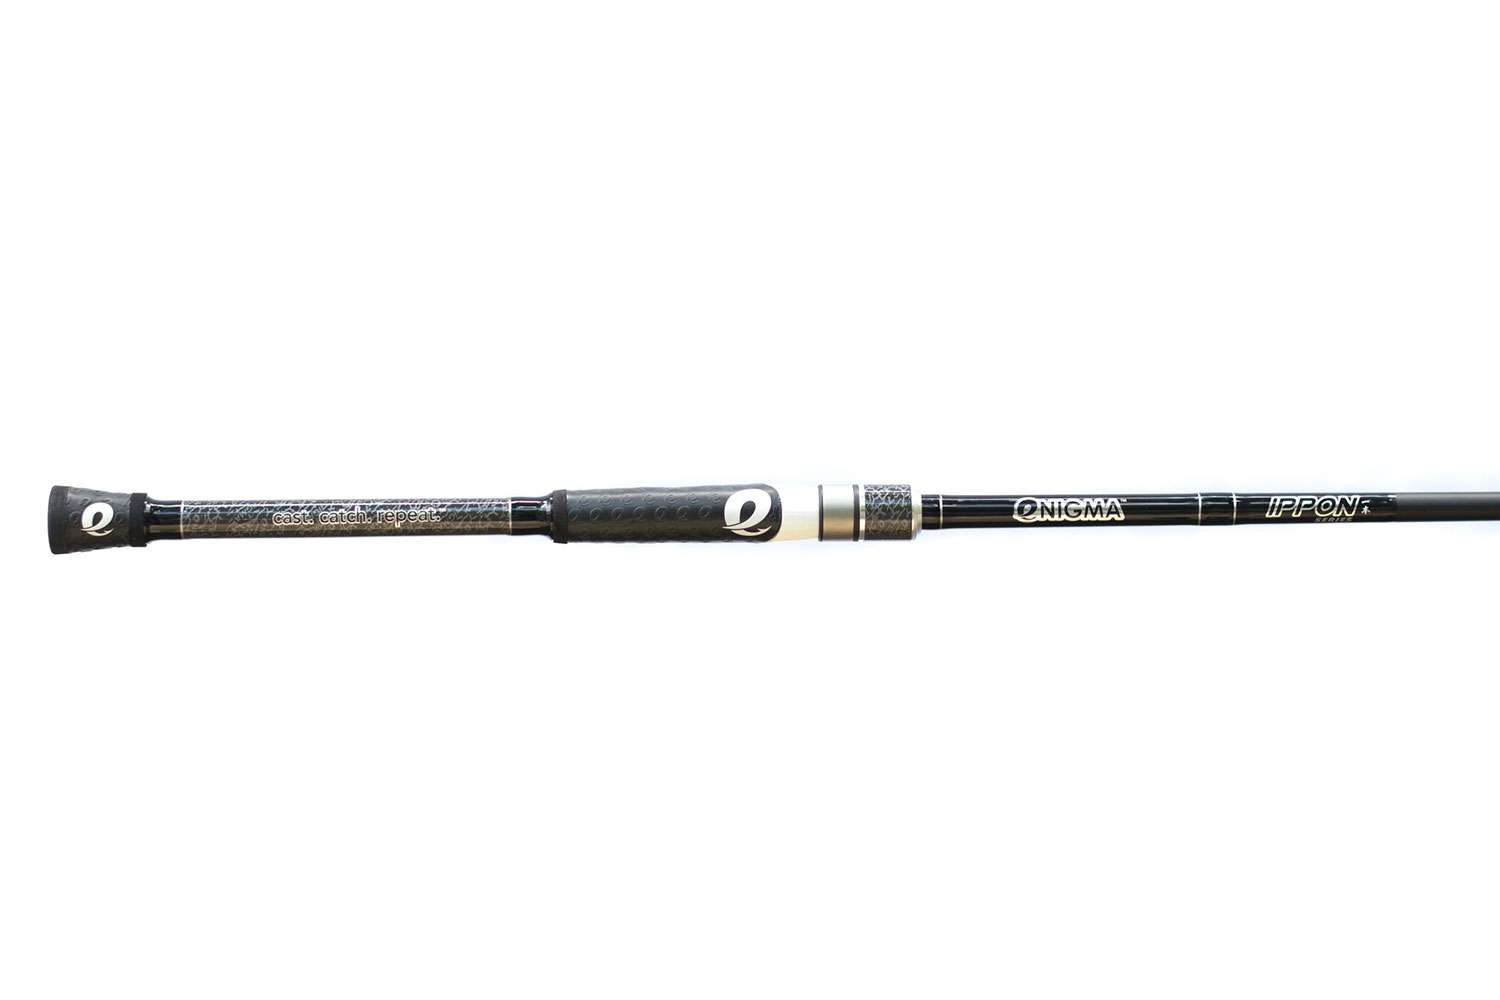 Fishing Pole | Lightweight Fishing Poles, & Retractable - Braided Handle  Fishing Rod Pole with 360 Degrees Rotating Fishing End, Carbon Fiber Fresh